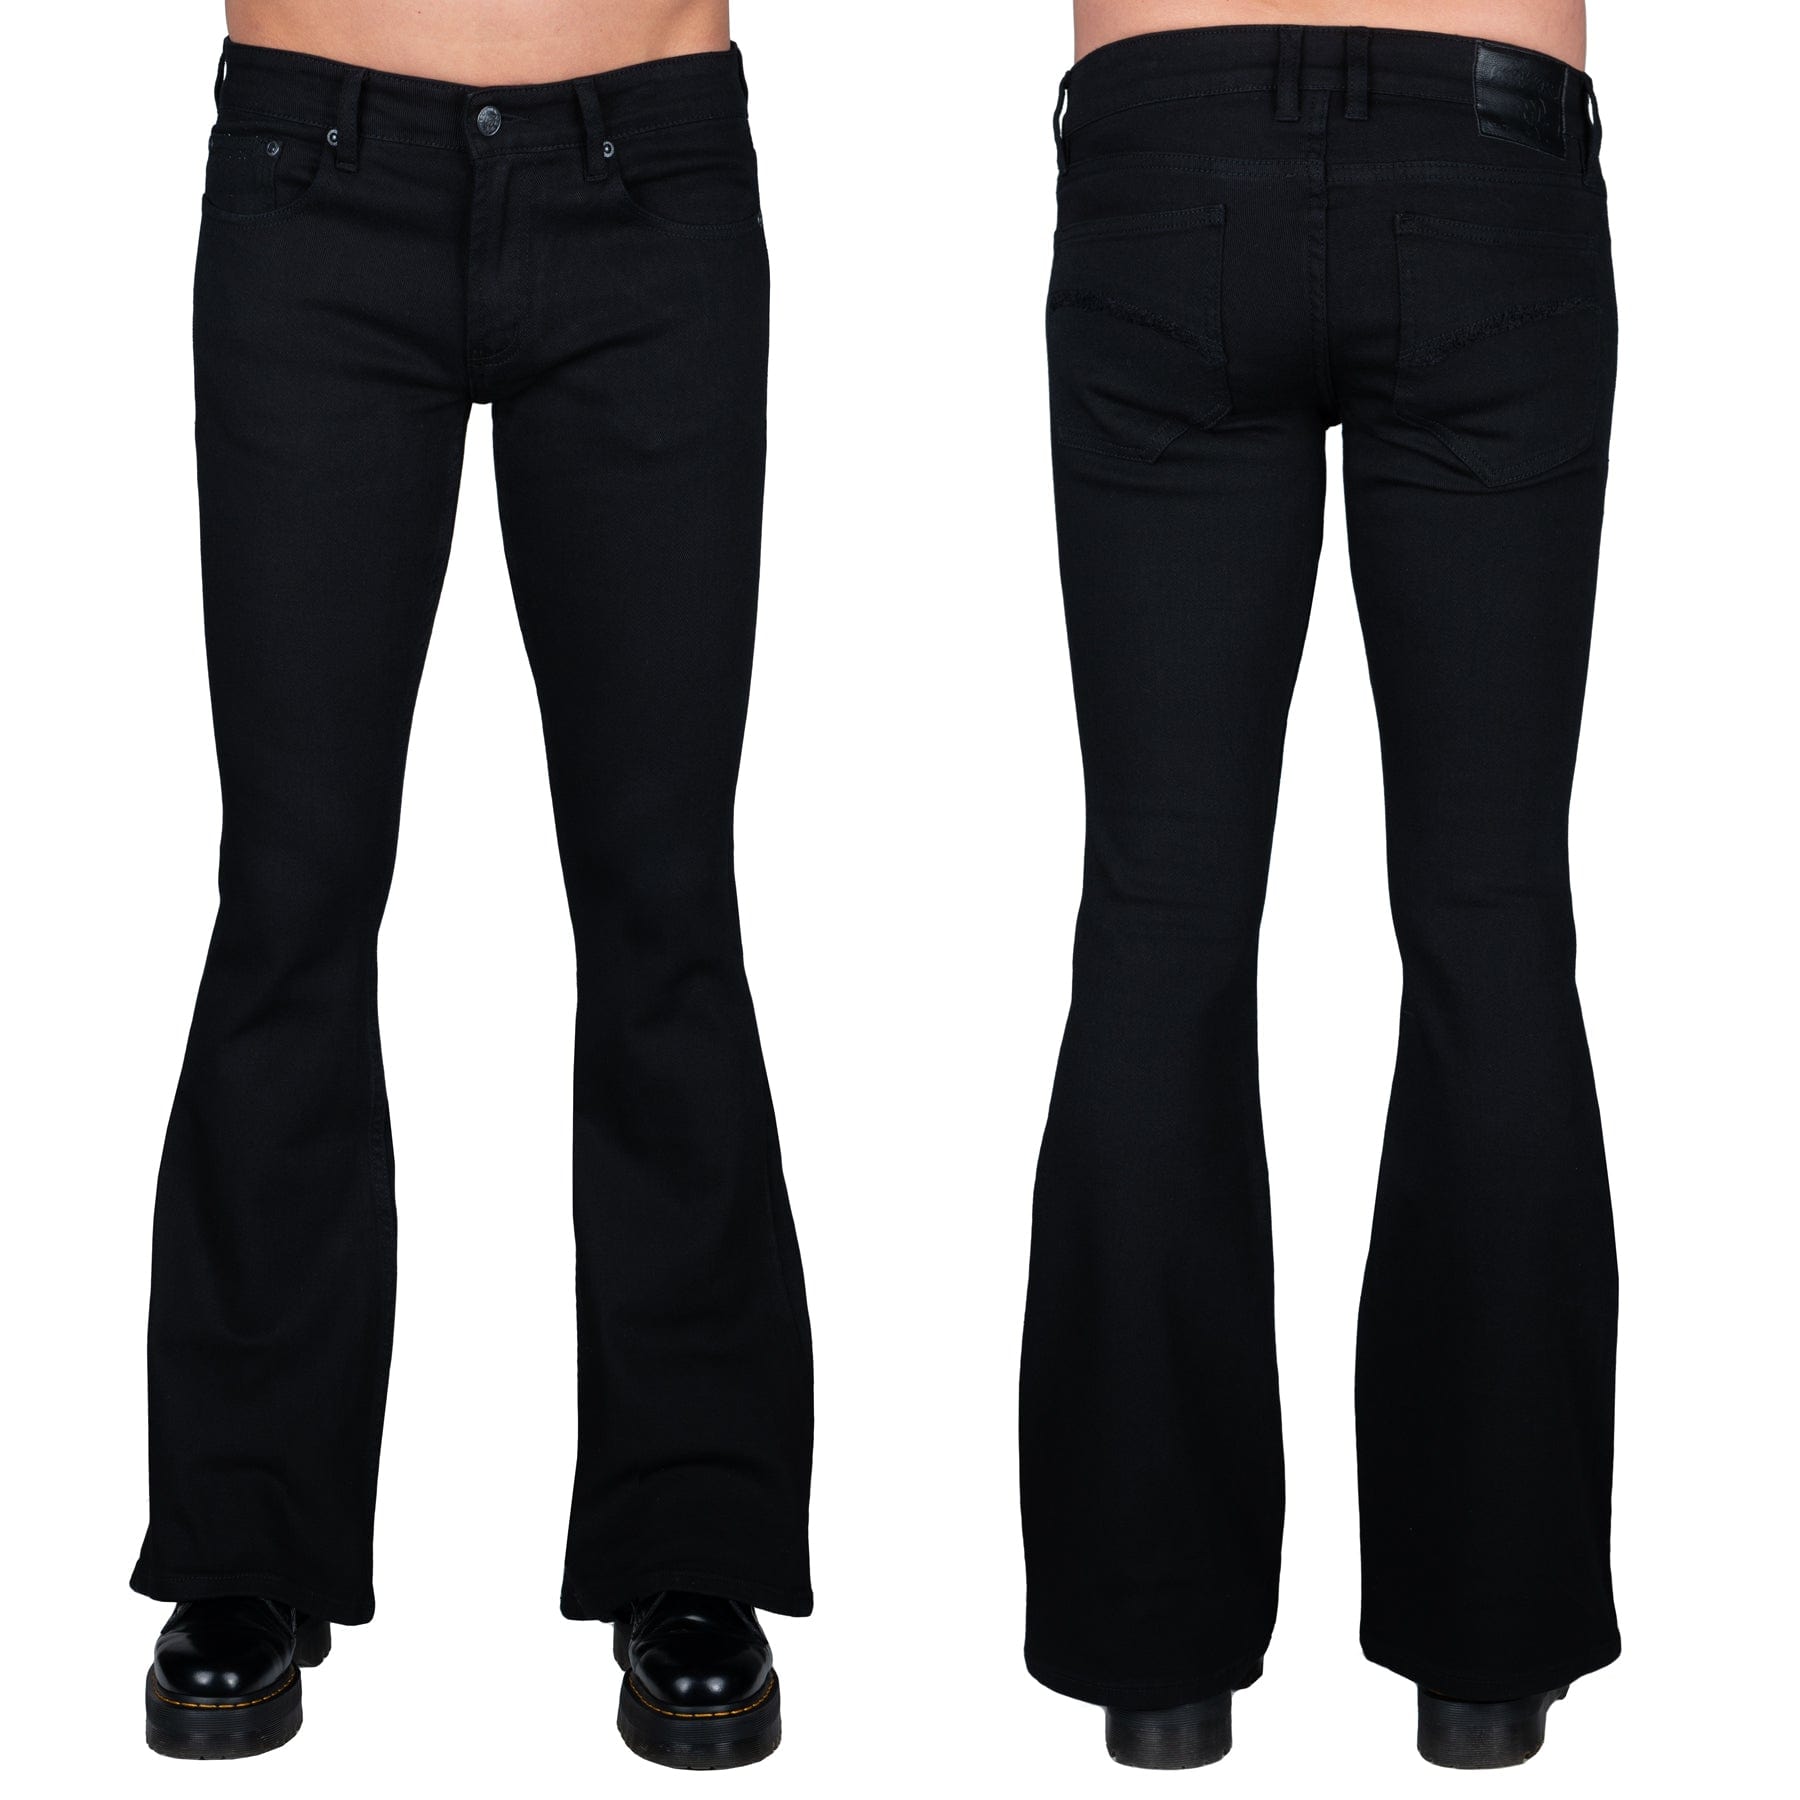 Essentials Collection Pants Starchaser Jeans - Black